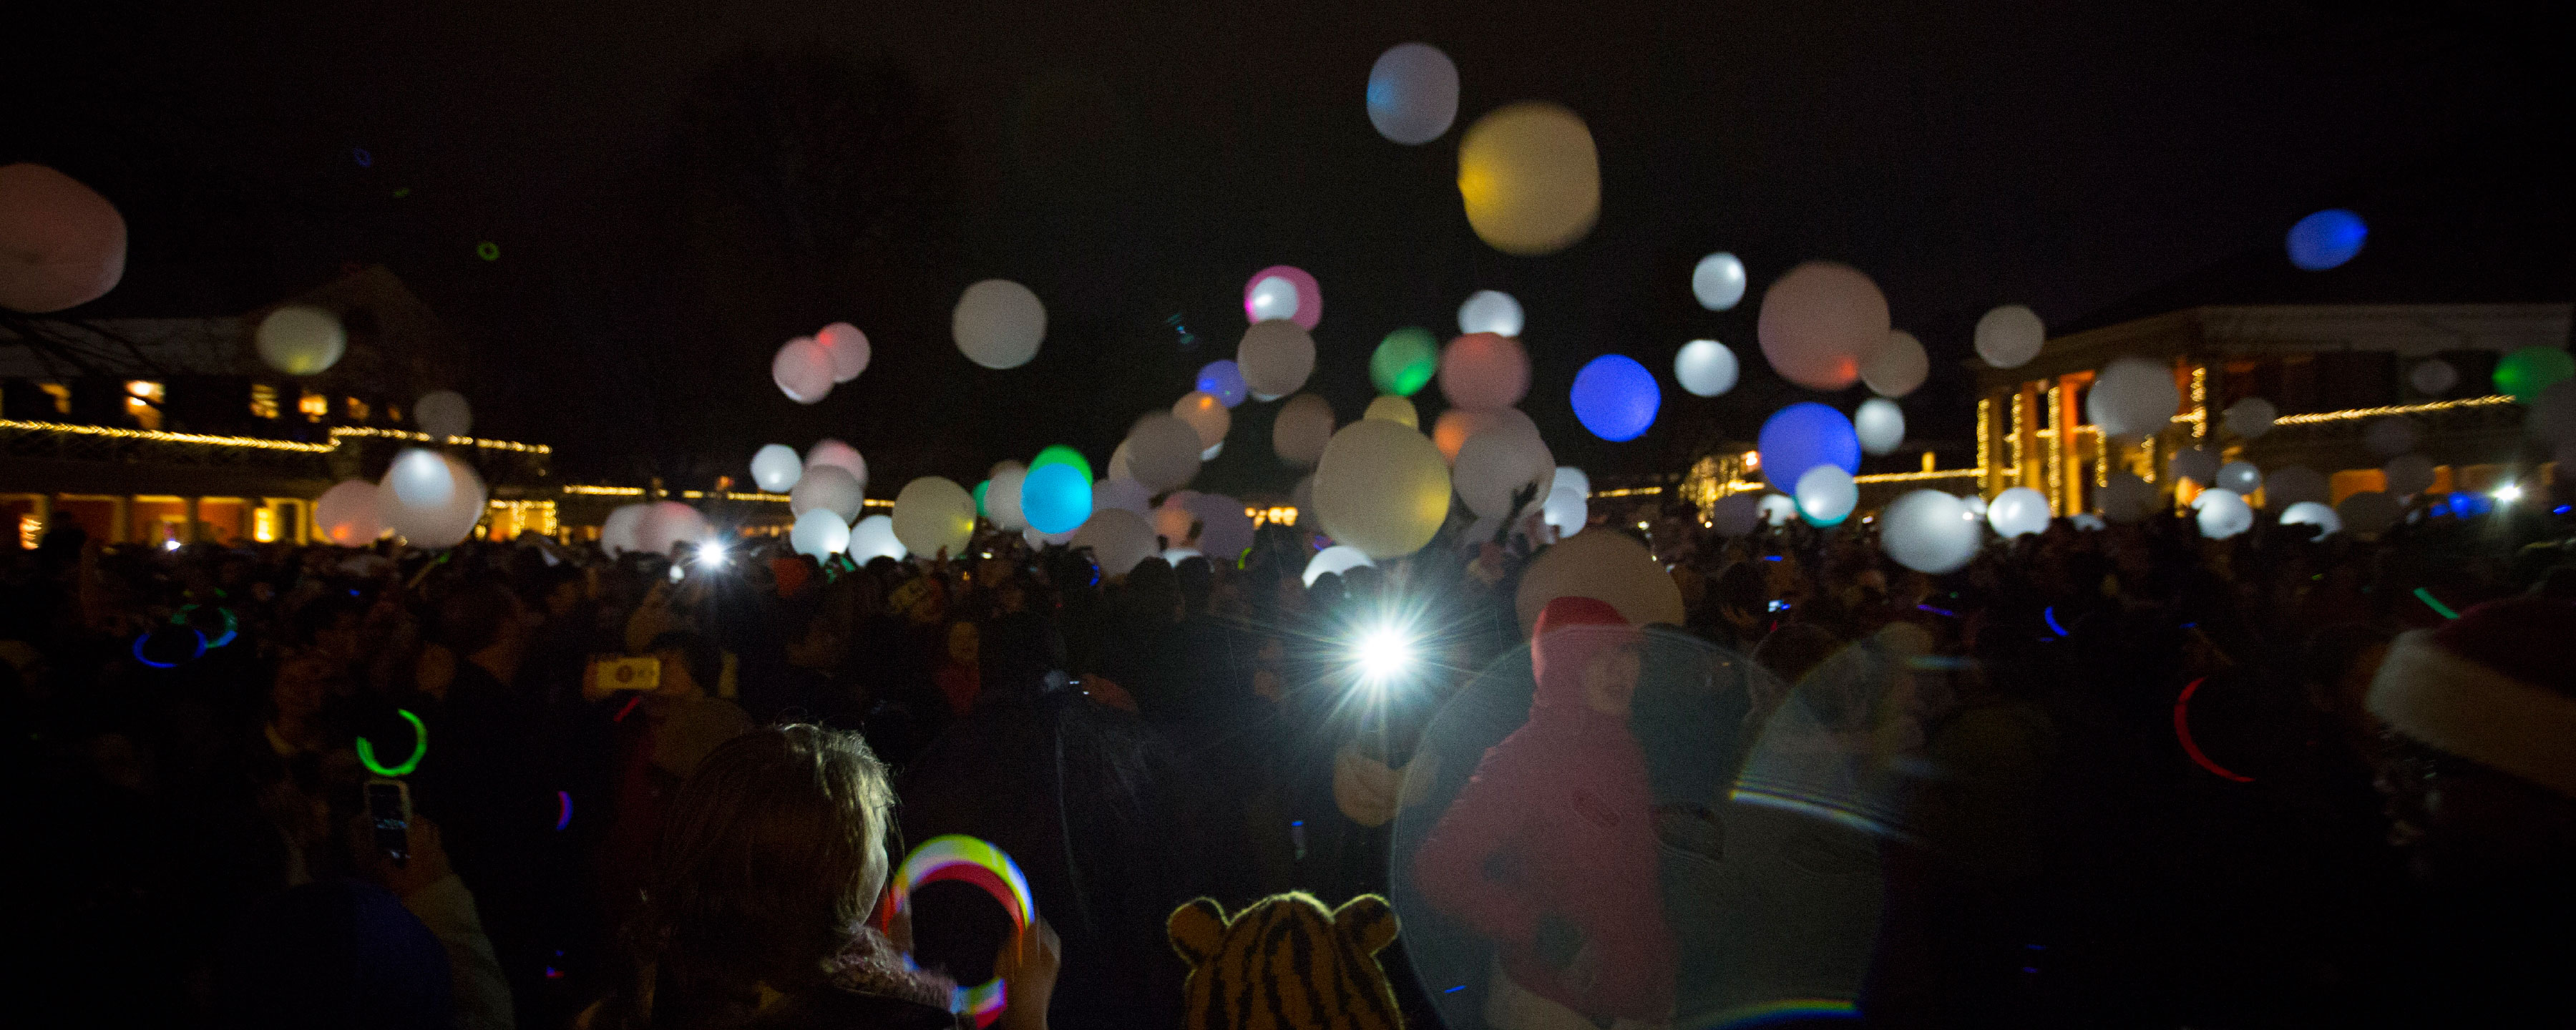 Glow in the dark balloons fly high over a crowd on the lawn